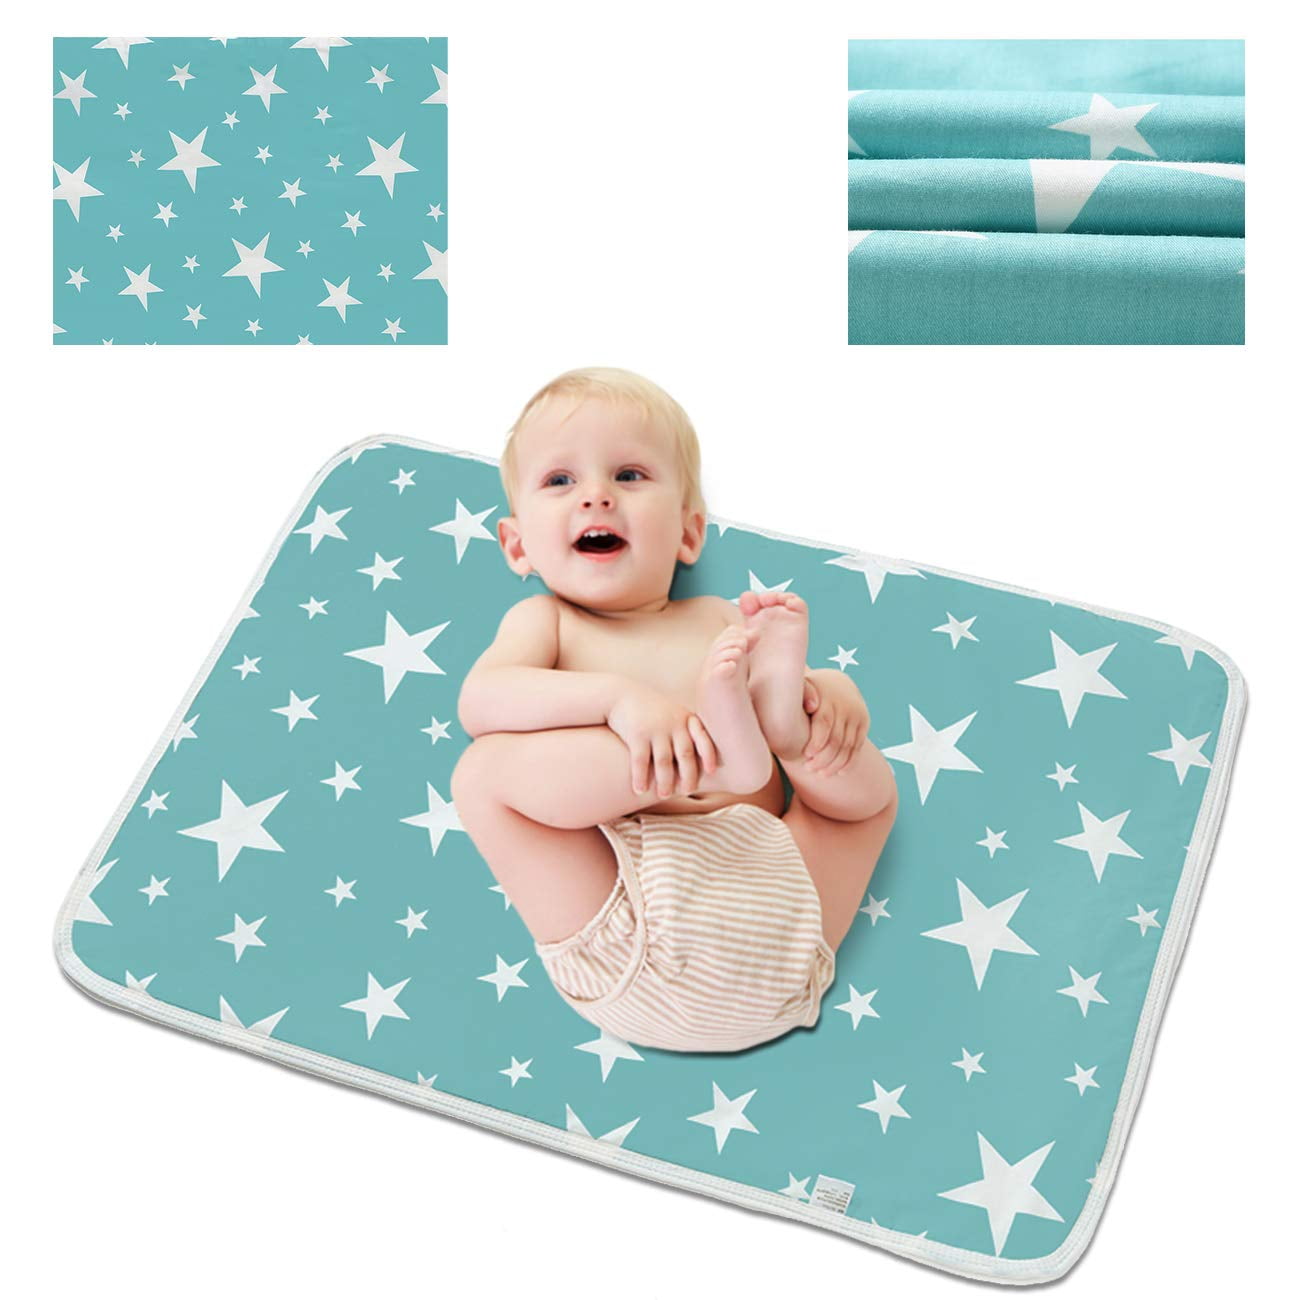 Baby Portable Foldable Washable Waterproof Nappy Diaper Changing Mat Pad SG 